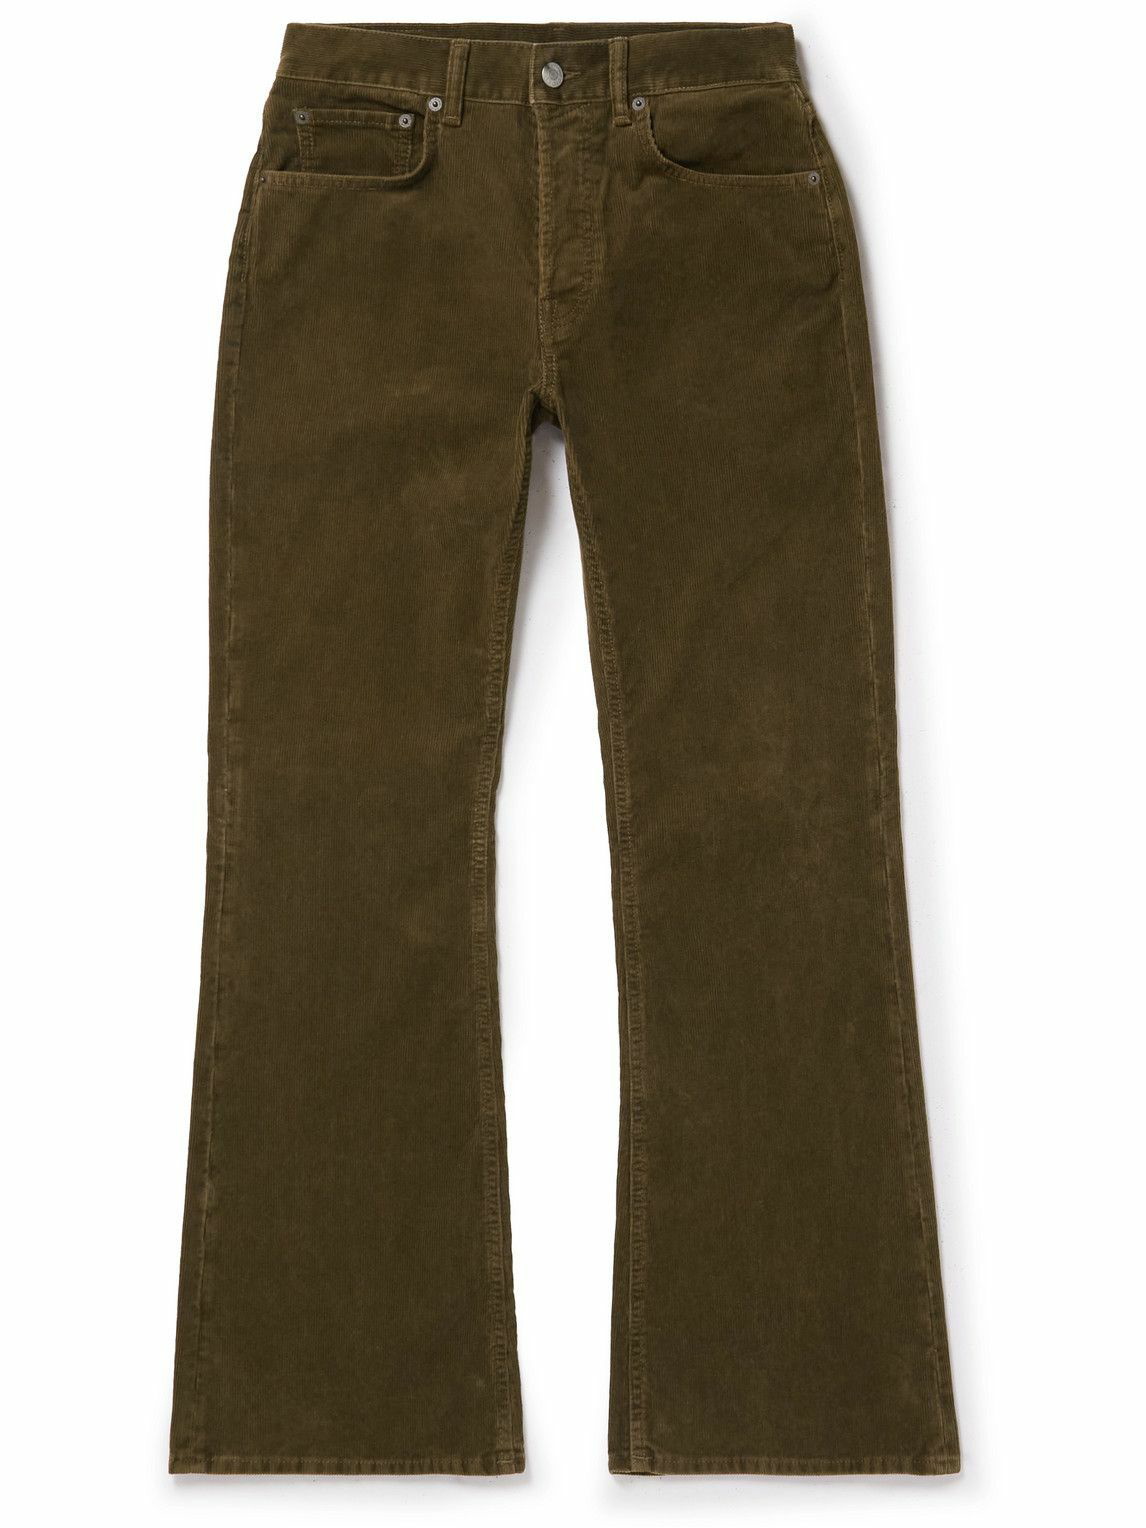 Curious Cord Trousers | Womens Trousers | Joe Browns